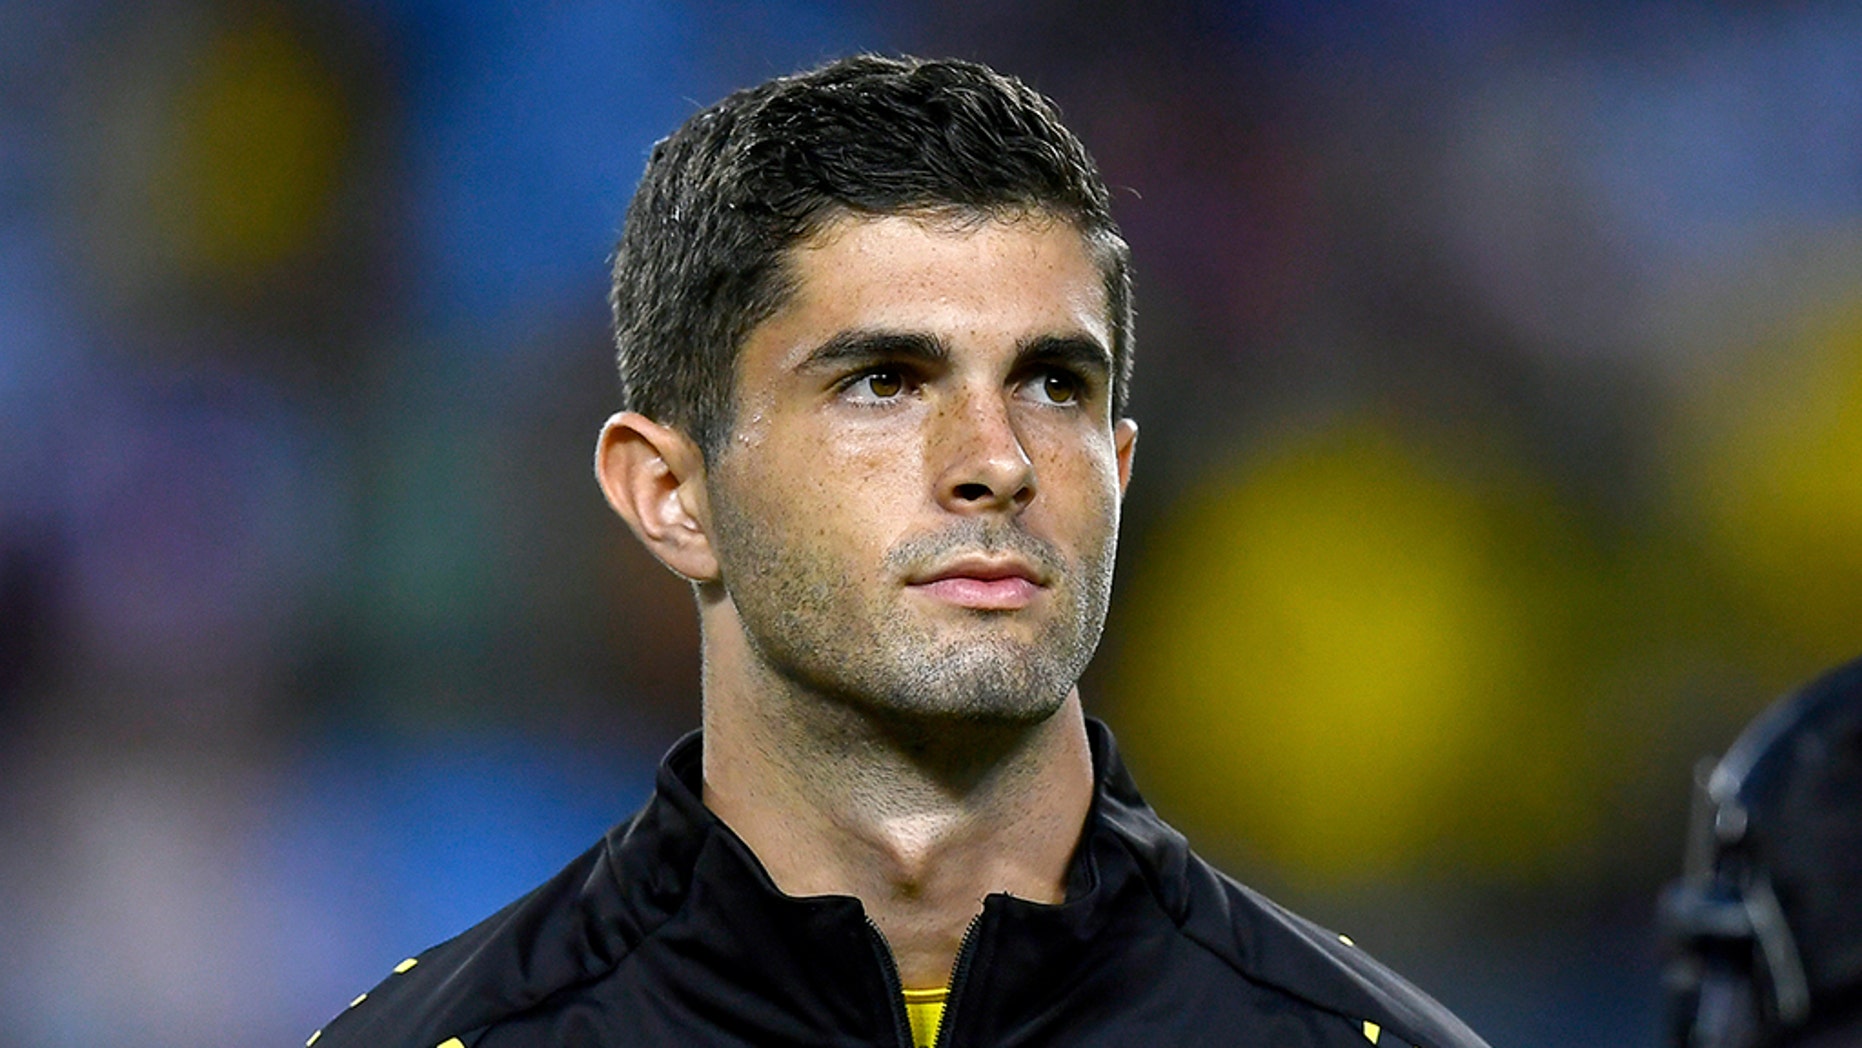 Christian Pulisic Misses Out On Man Of The Match Award Because Of Age Fox News 6871